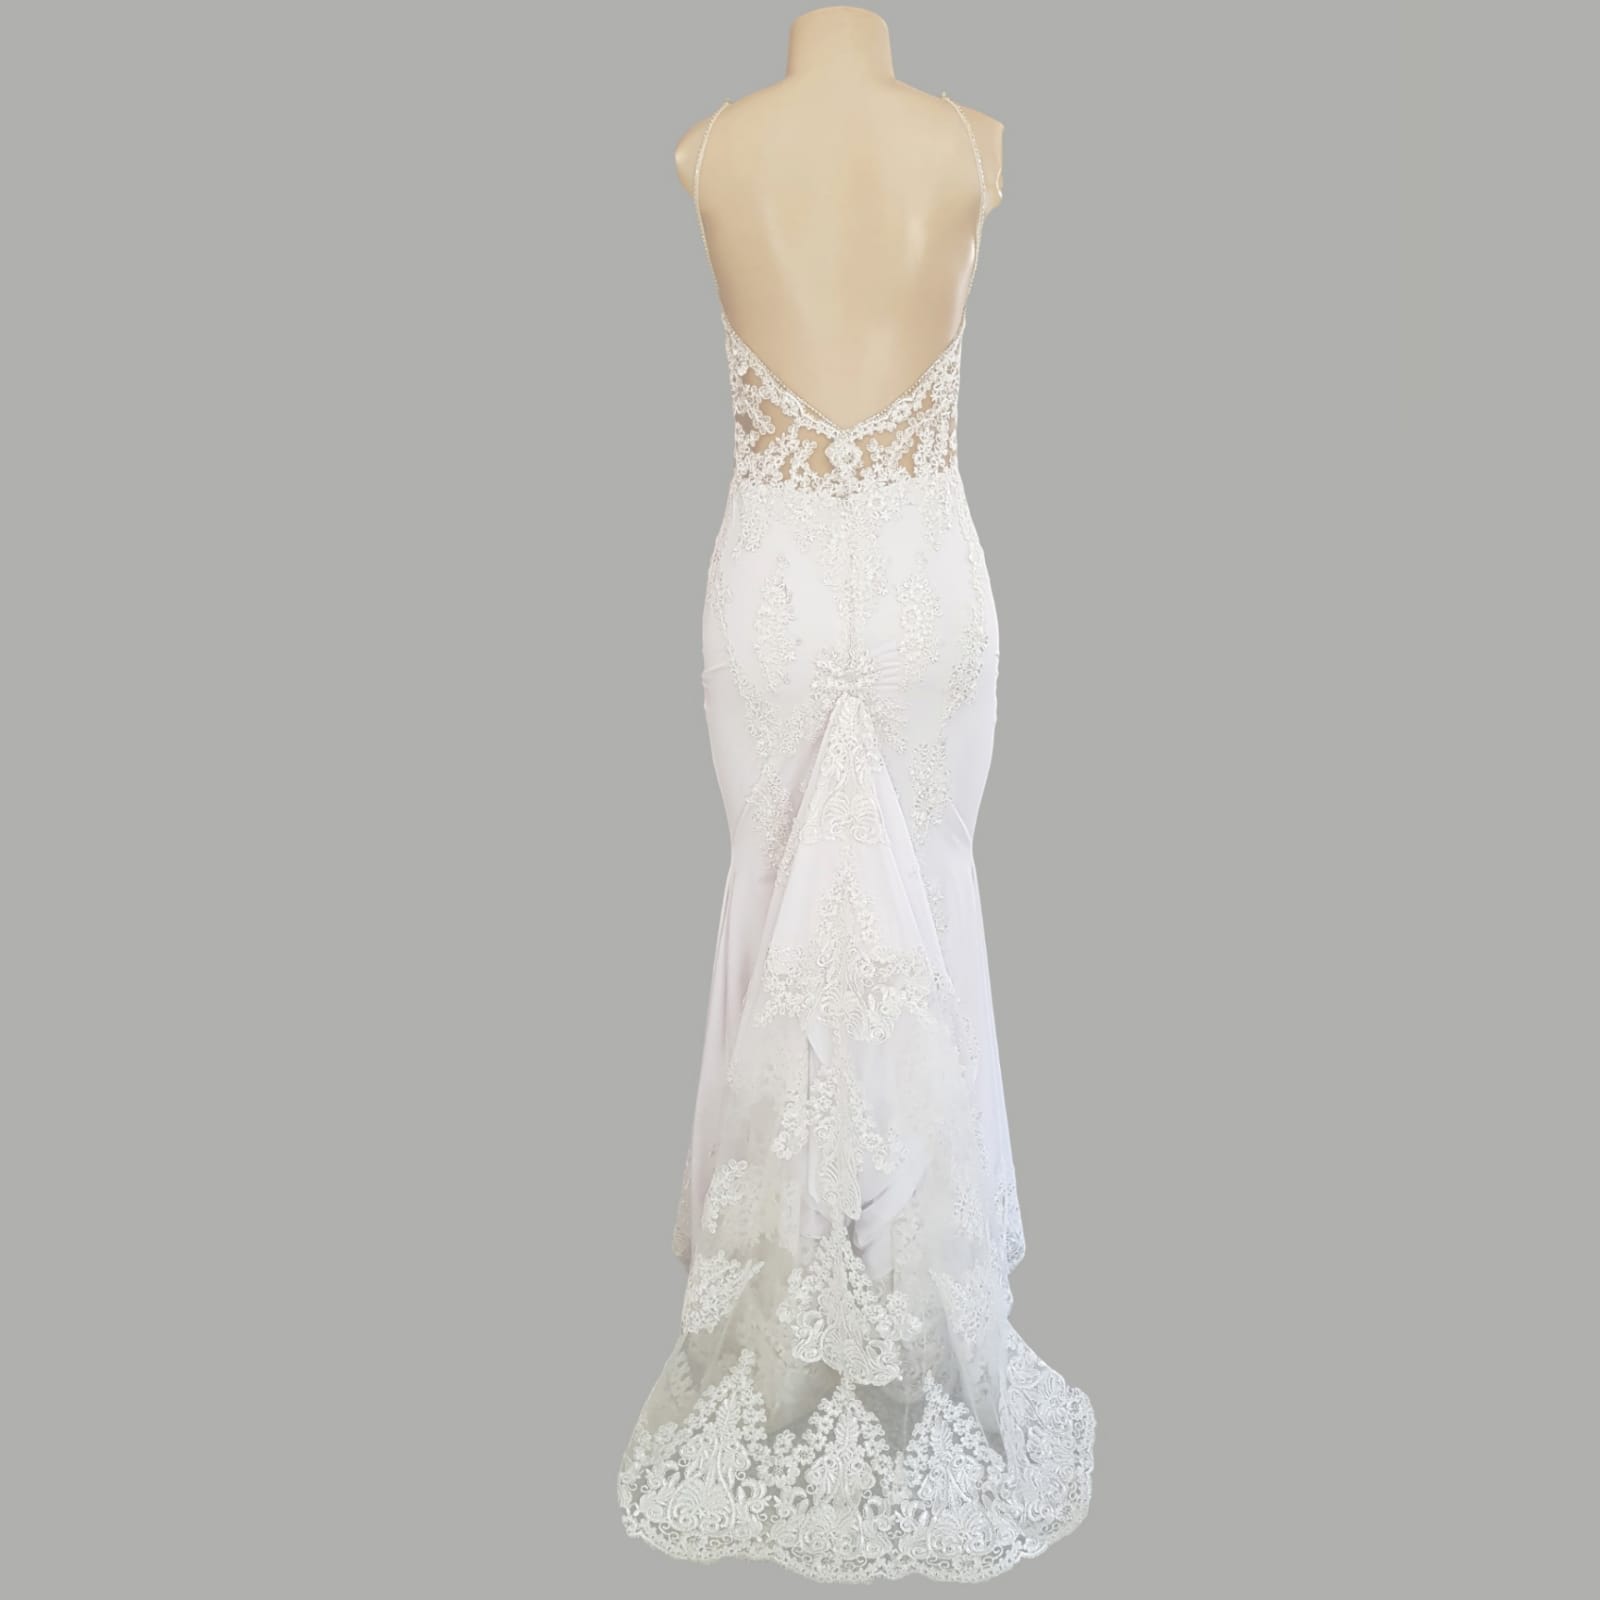 White lace mermaid wedding dress with lace train 11 white lace mermaid wedding dress, lace bodice with a v neckline, low open back and thin shoulder straps detailed with diamante. Lace from the waist down, creating a long sheer lace train. With a train hookup and a matching garter.